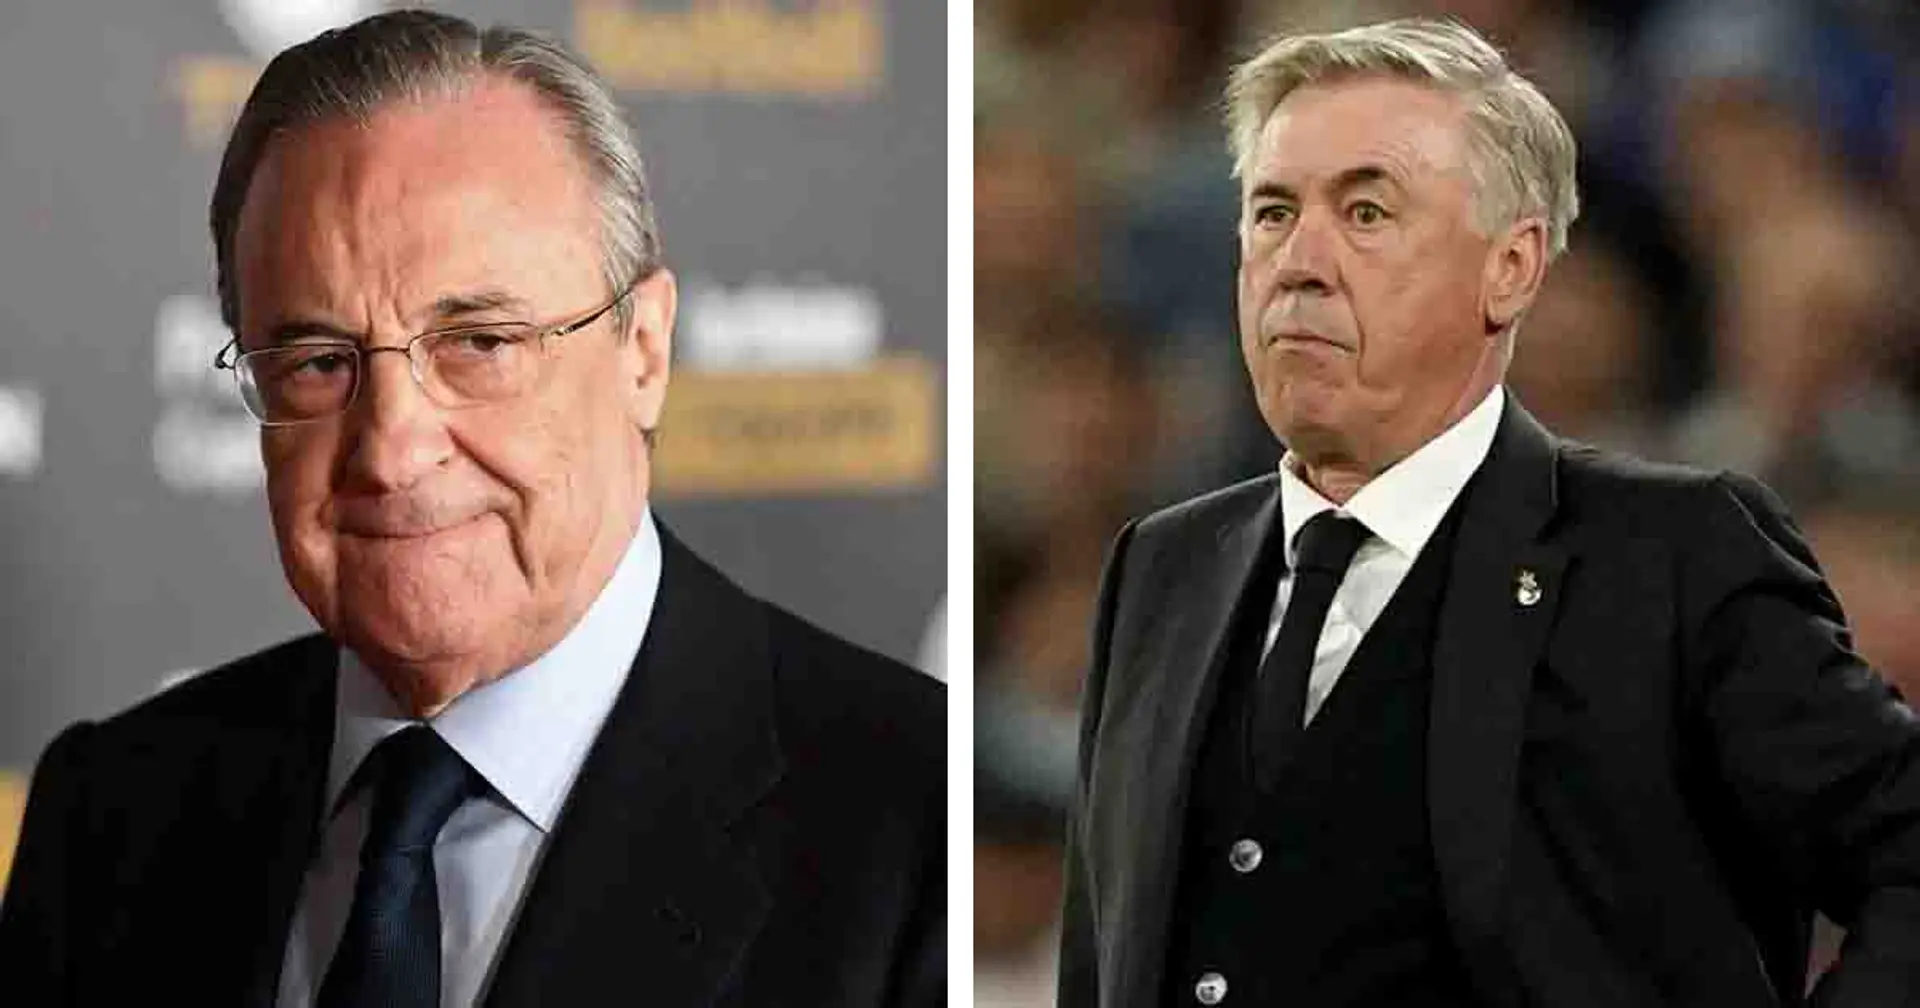 Florentino Perez to hold meeting with Ancelotti over discussion of two burning issues